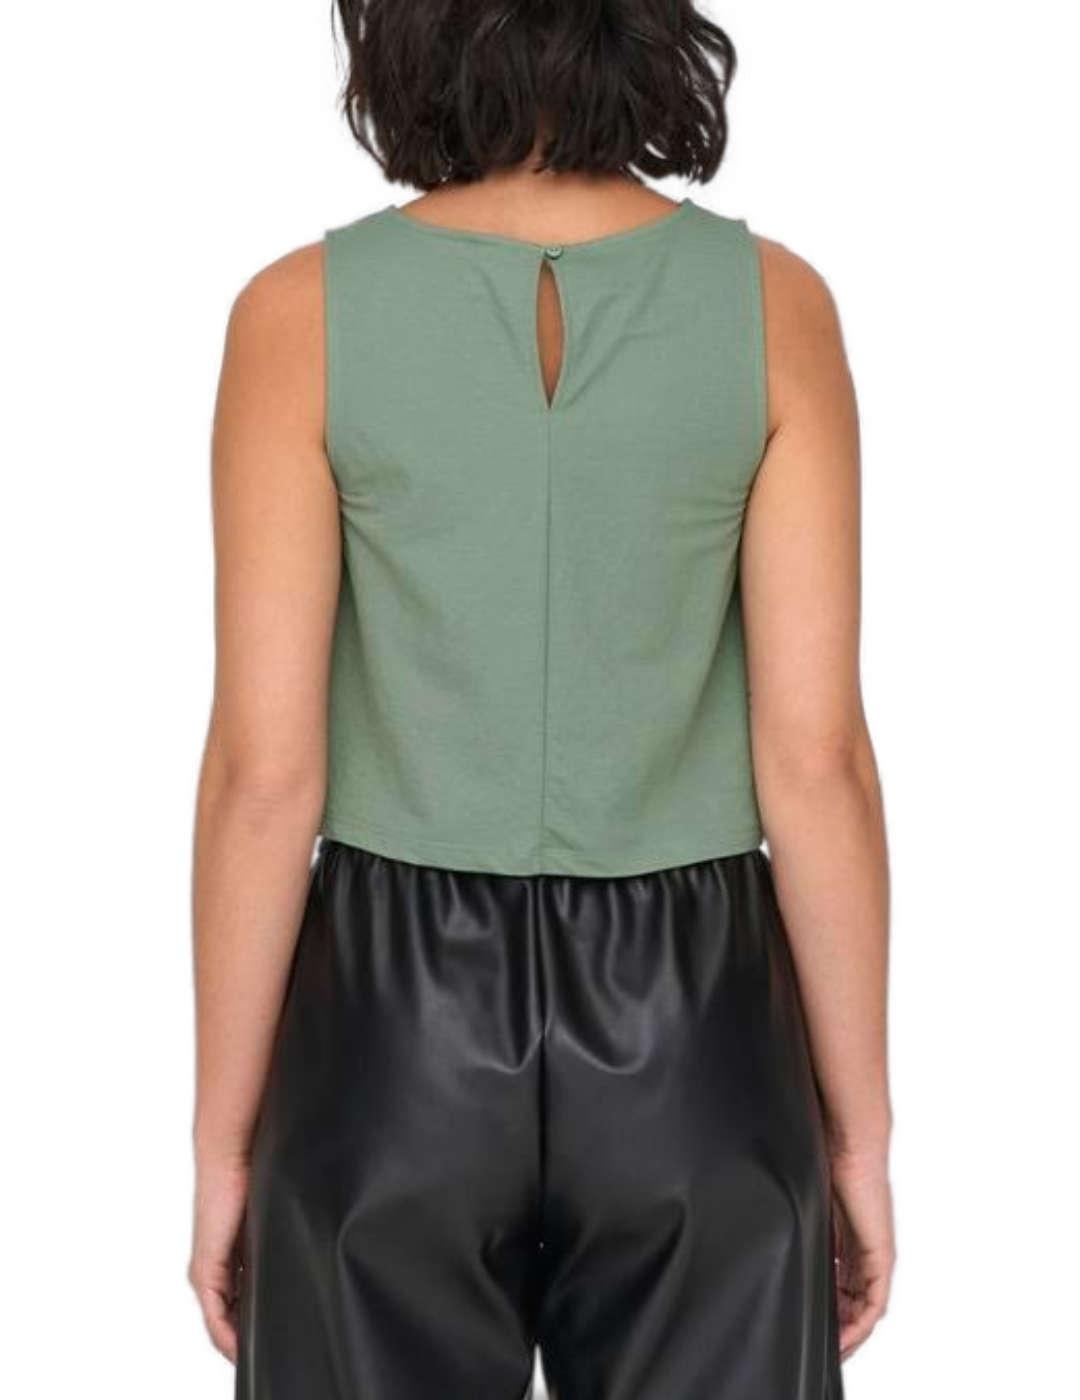 Top crop Only Jany verde agua tirante ancho para mujer